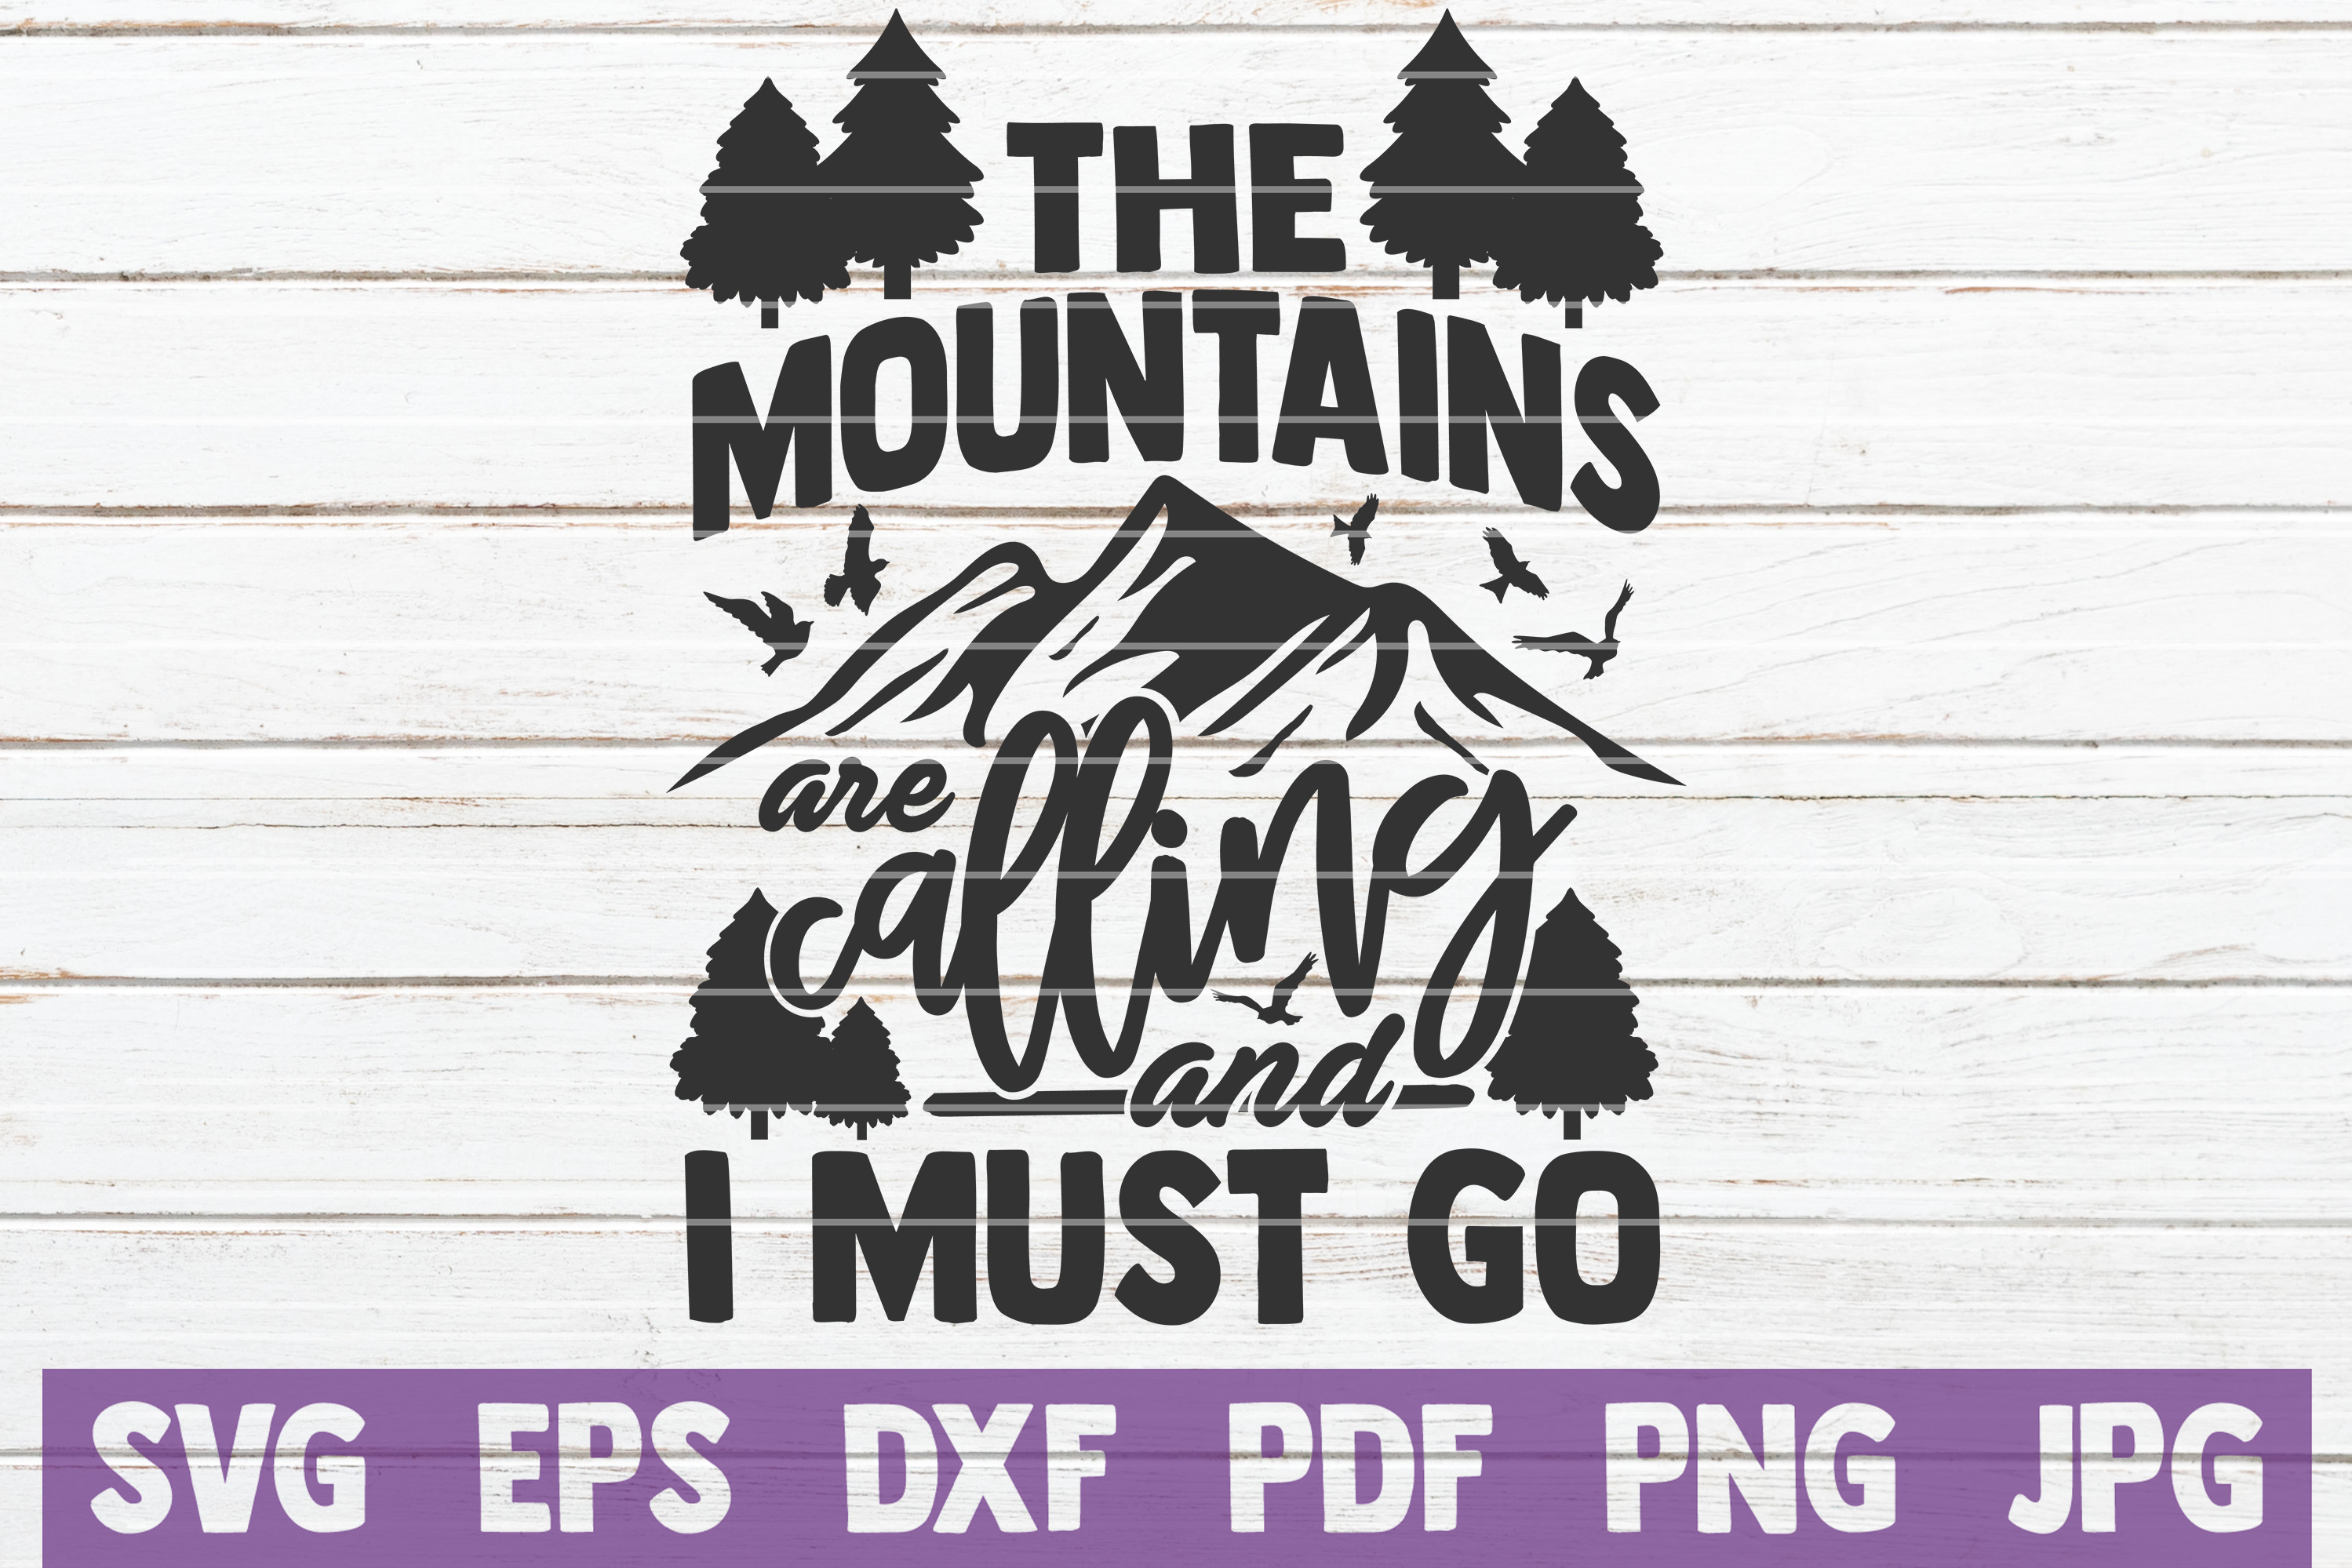 Download The Mountains Are Calling And I Must Go SVG Cut File